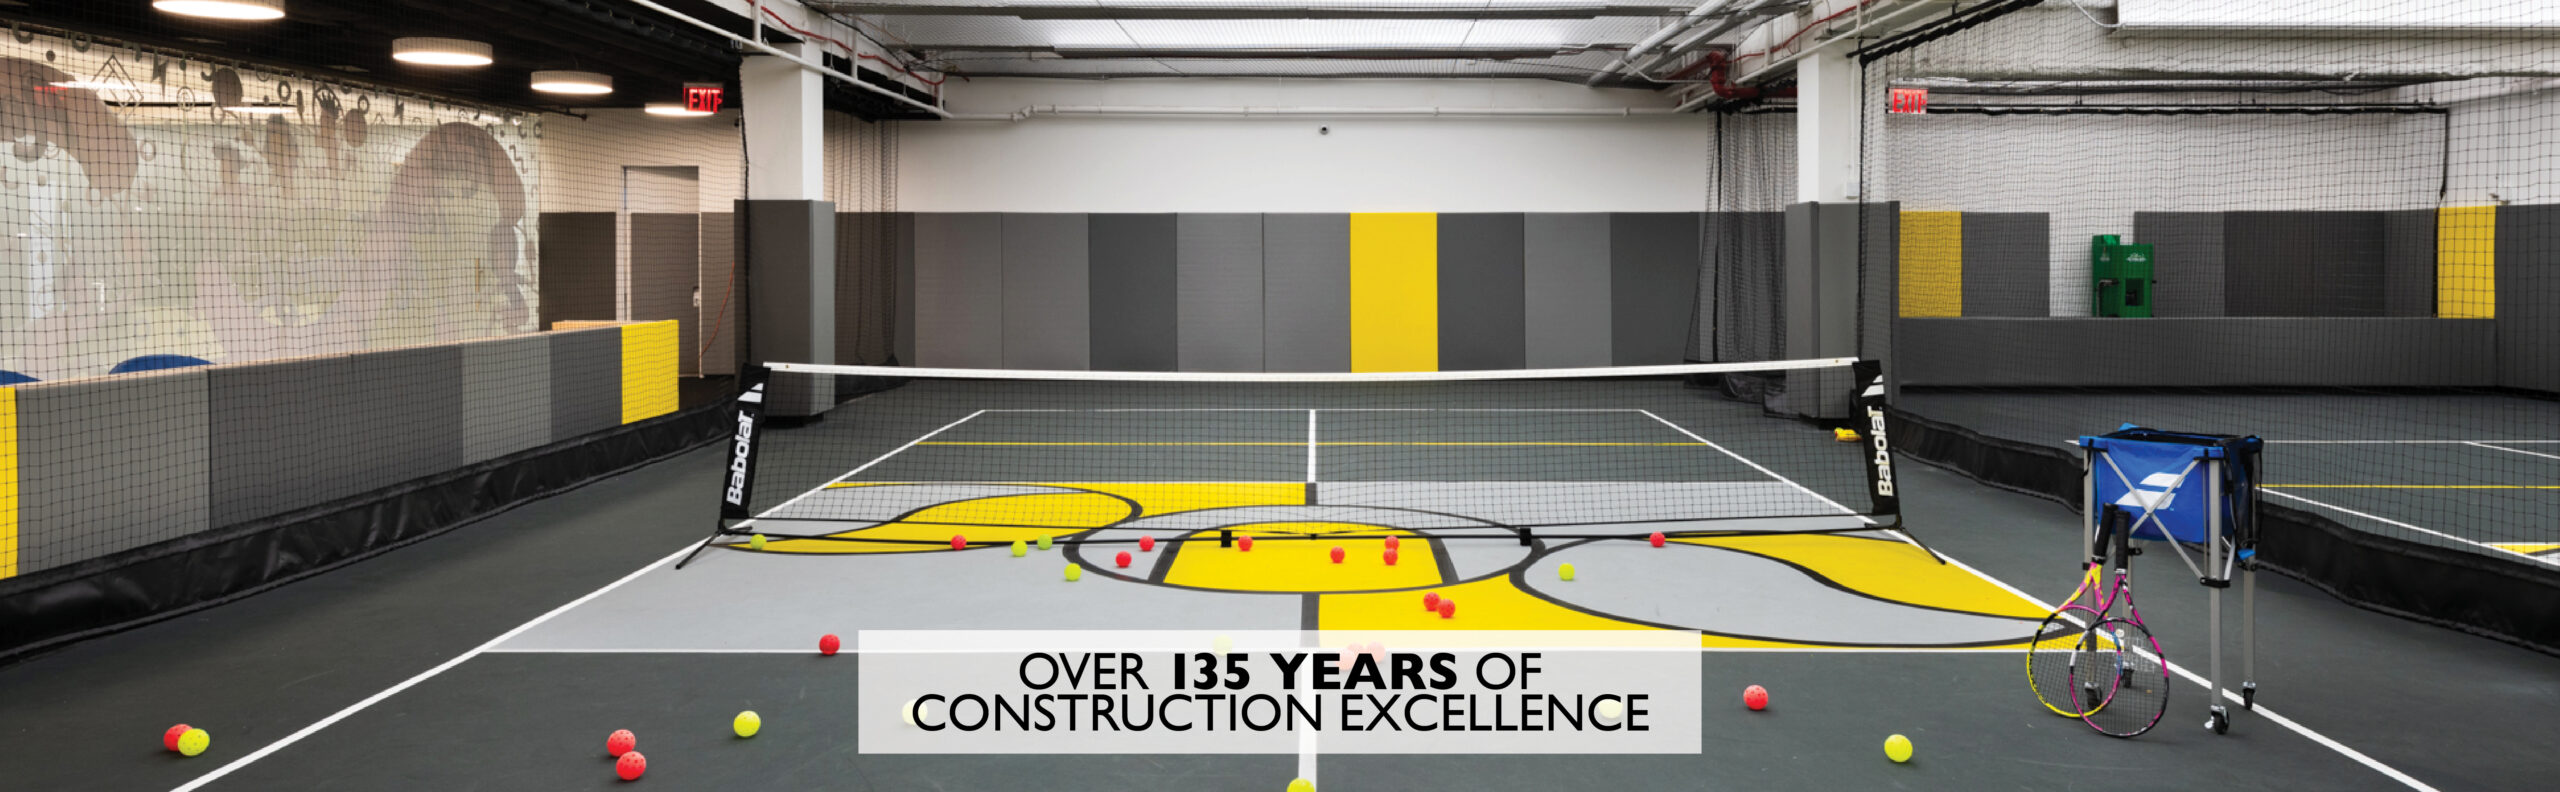 Court 16 | Built By Gallin